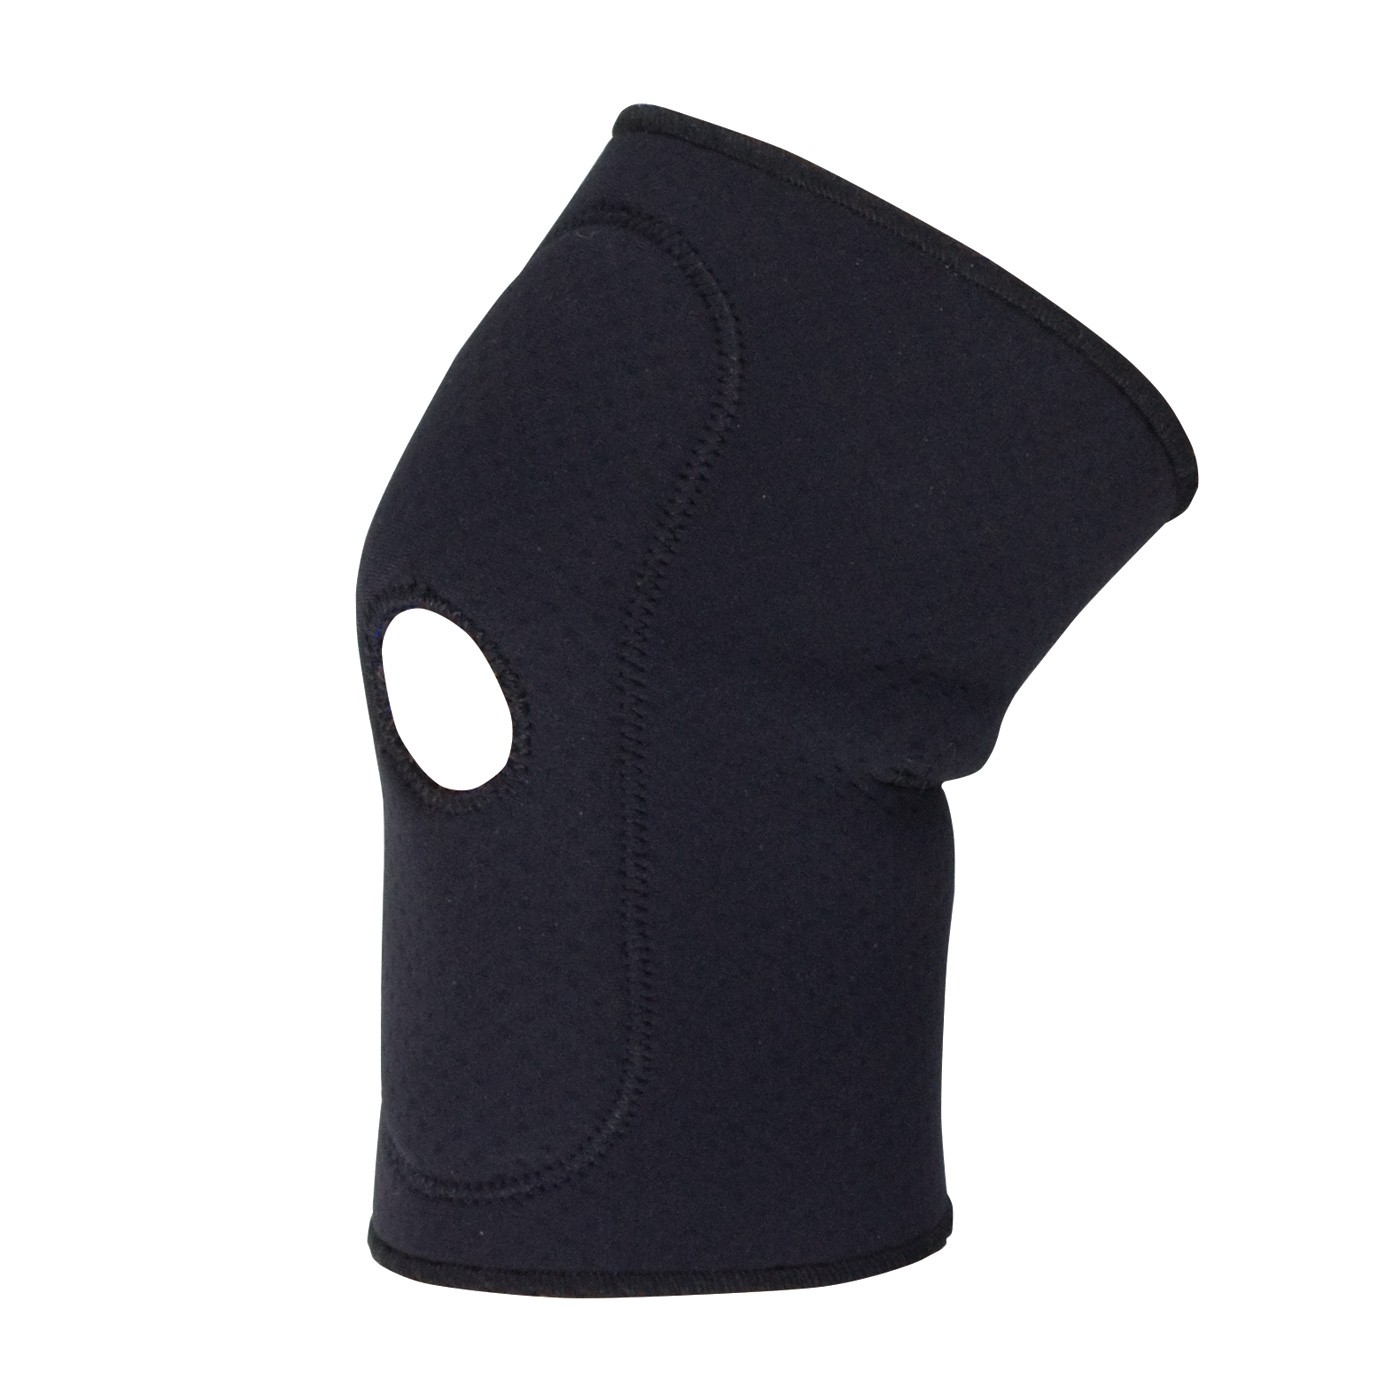 Knee Sleeve, Large 15-17", Terry Lined Neoprene w/ Nylon Outer Shell